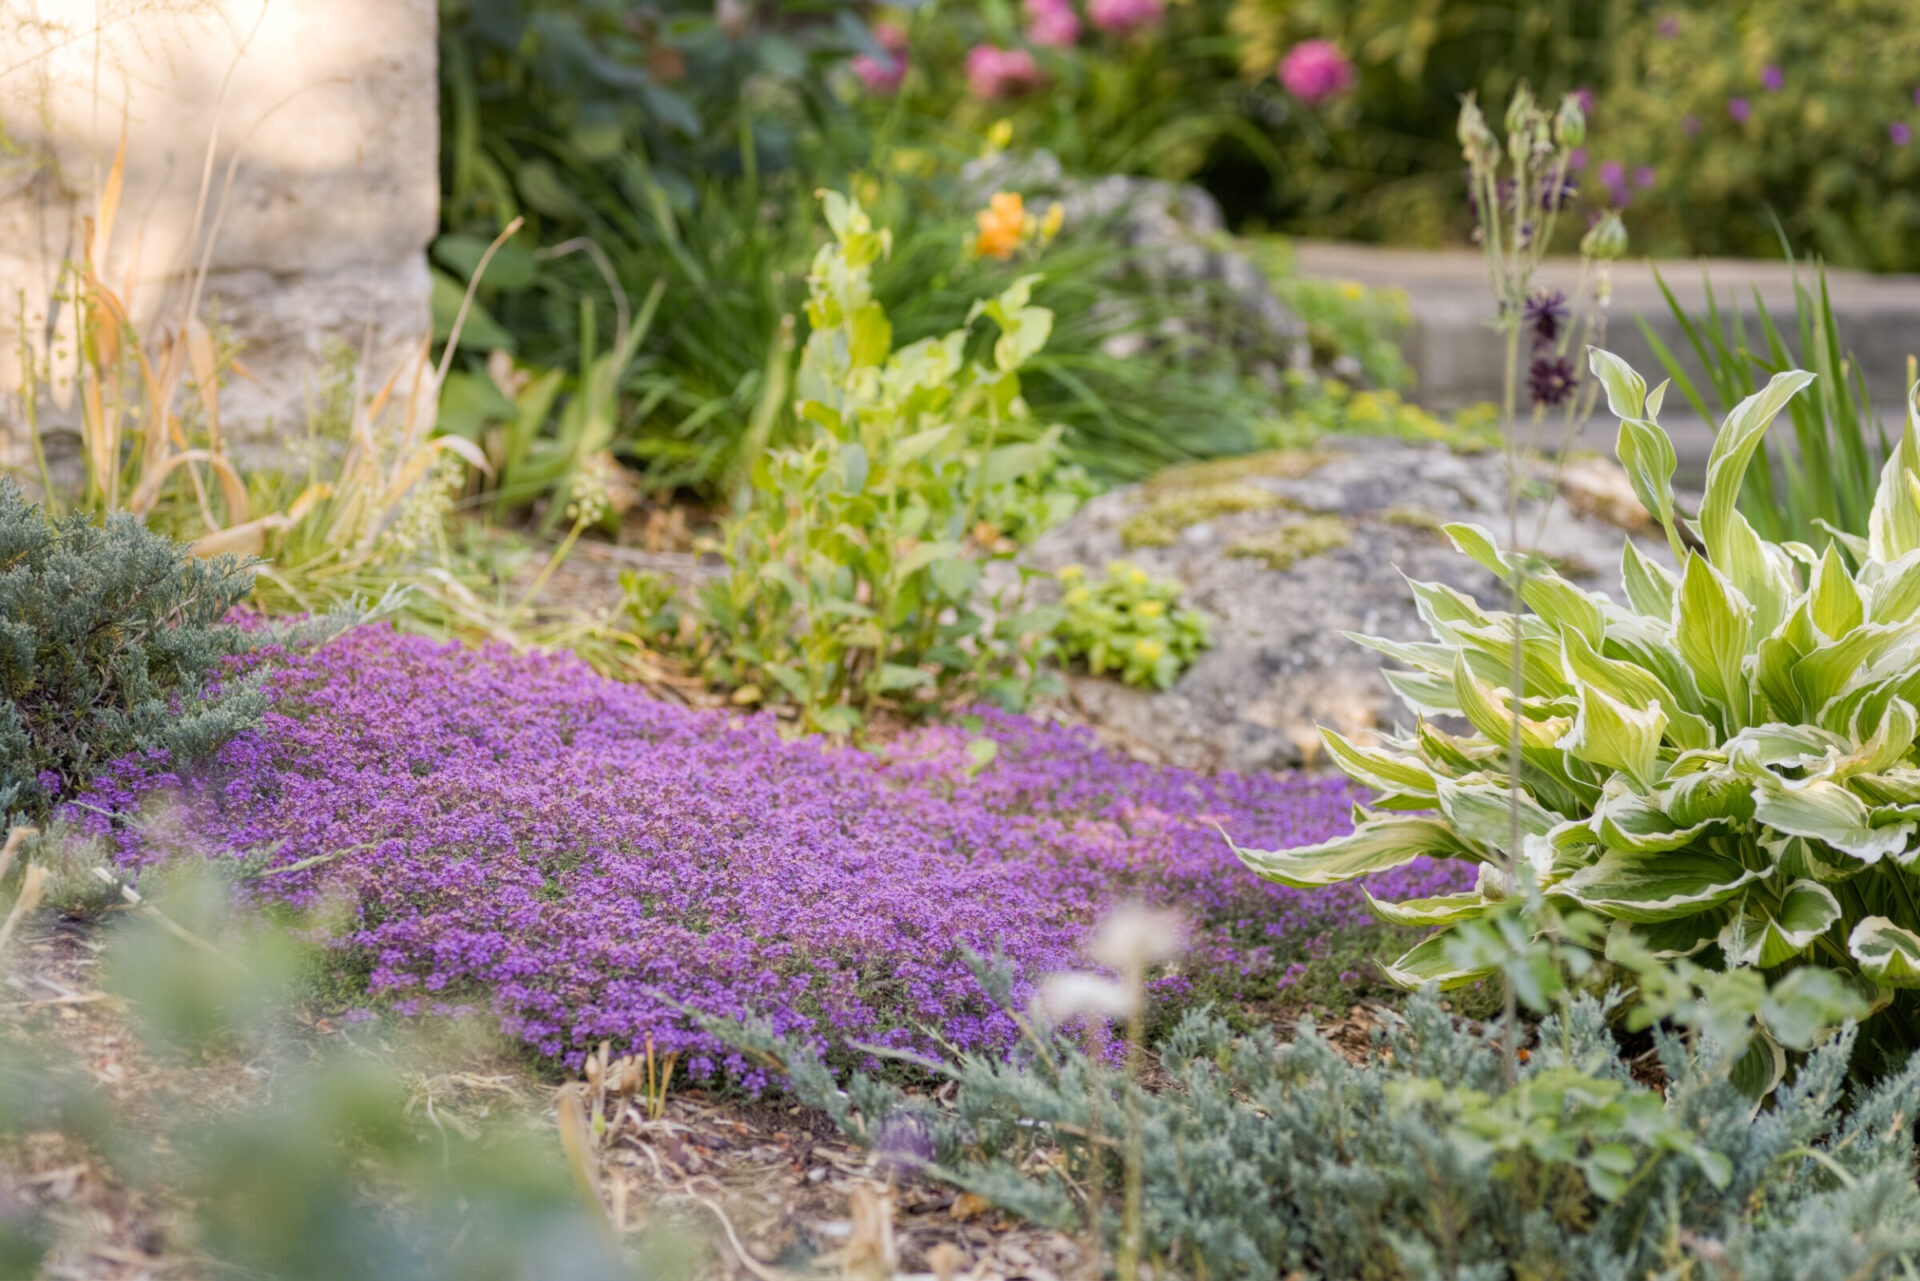 This image displays a vibrant garden with purple flowers, lush green plants, and textured rocks bathed in soft, natural light.